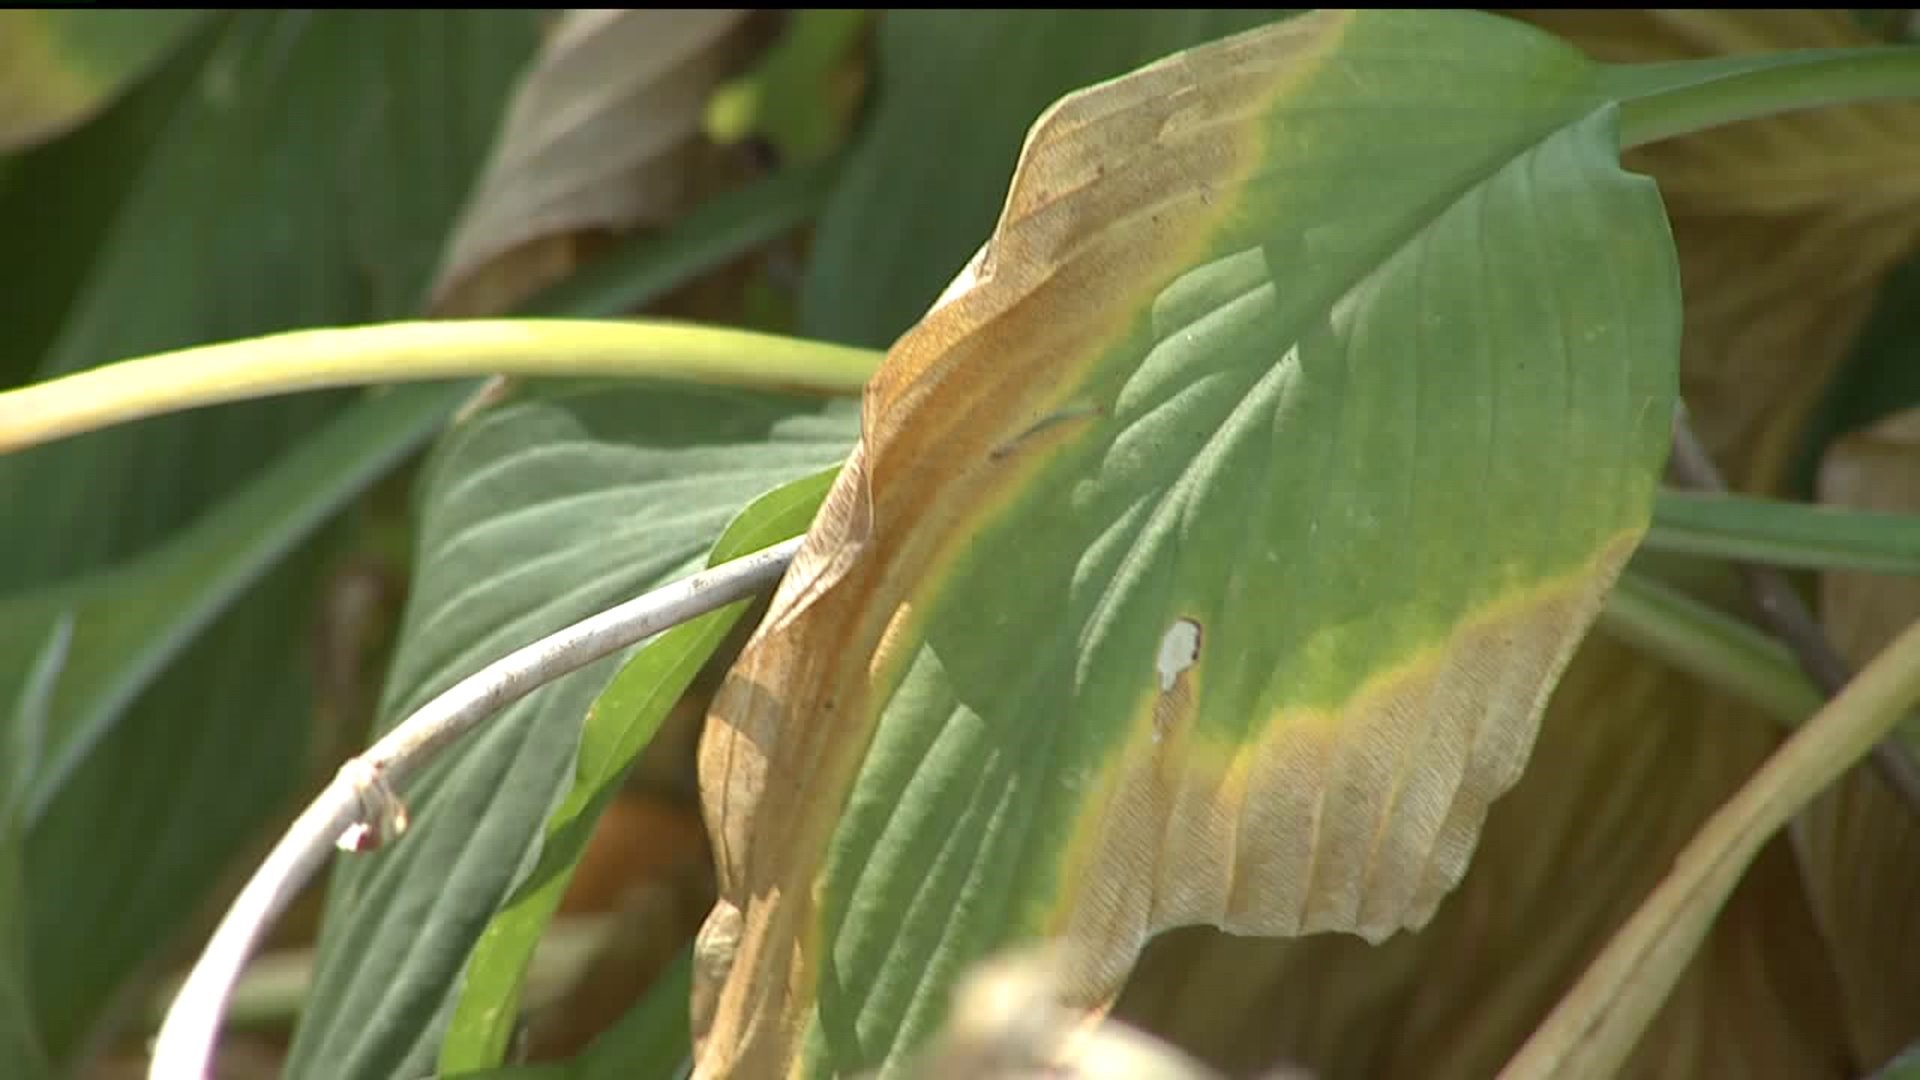 Dry weather conditions affecting plants